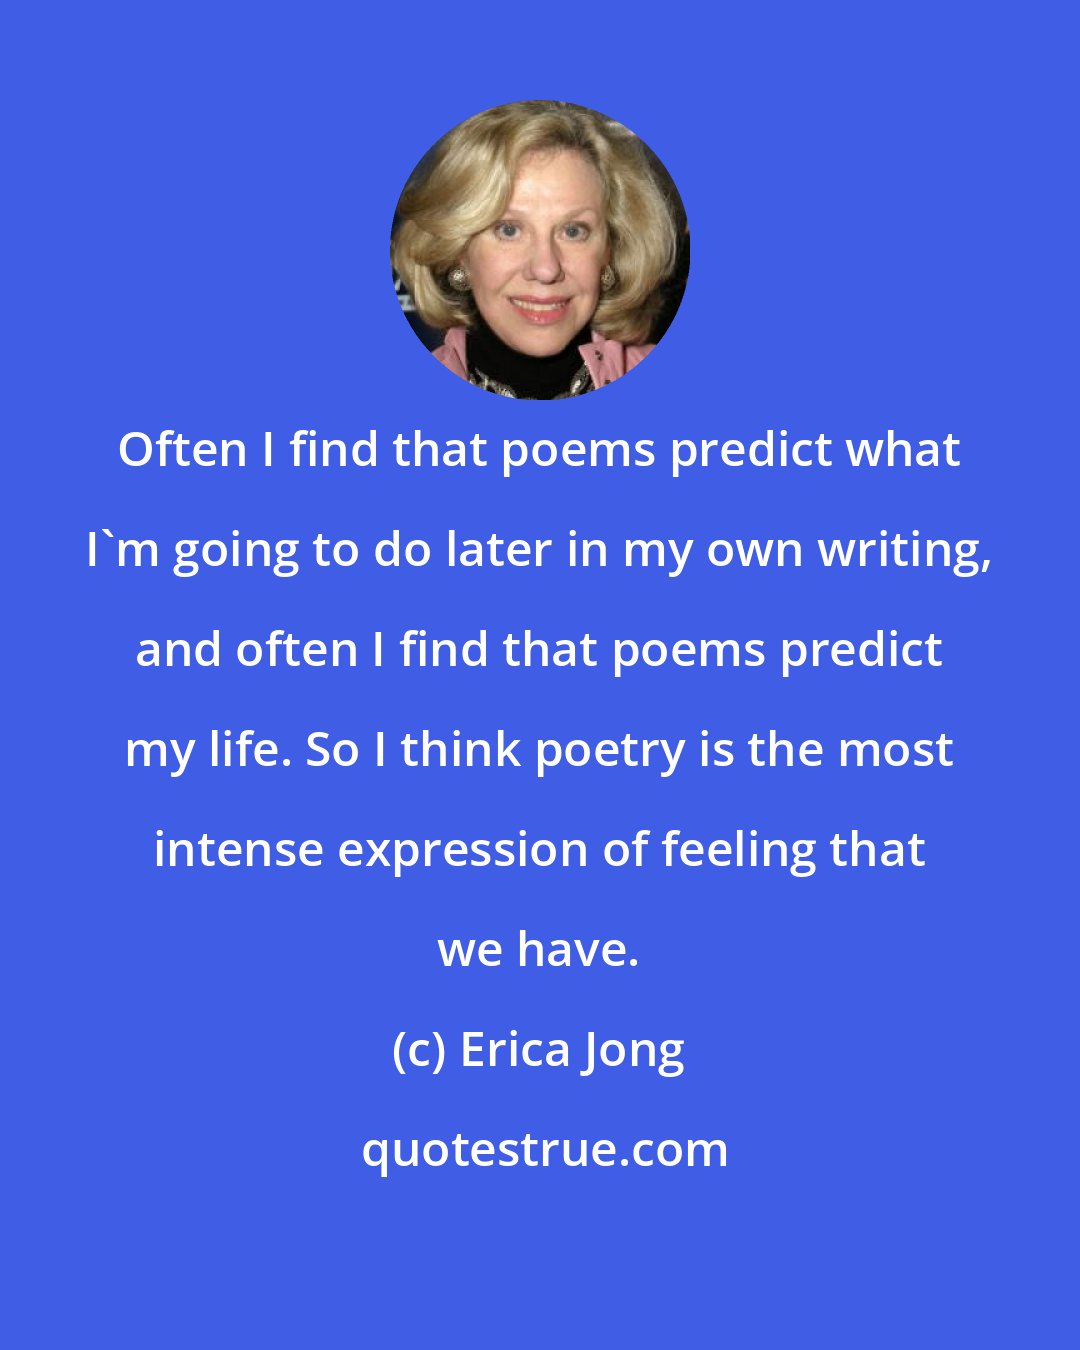 Erica Jong: Often I find that poems predict what I'm going to do later in my own writing, and often I find that poems predict my life. So I think poetry is the most intense expression of feeling that we have.